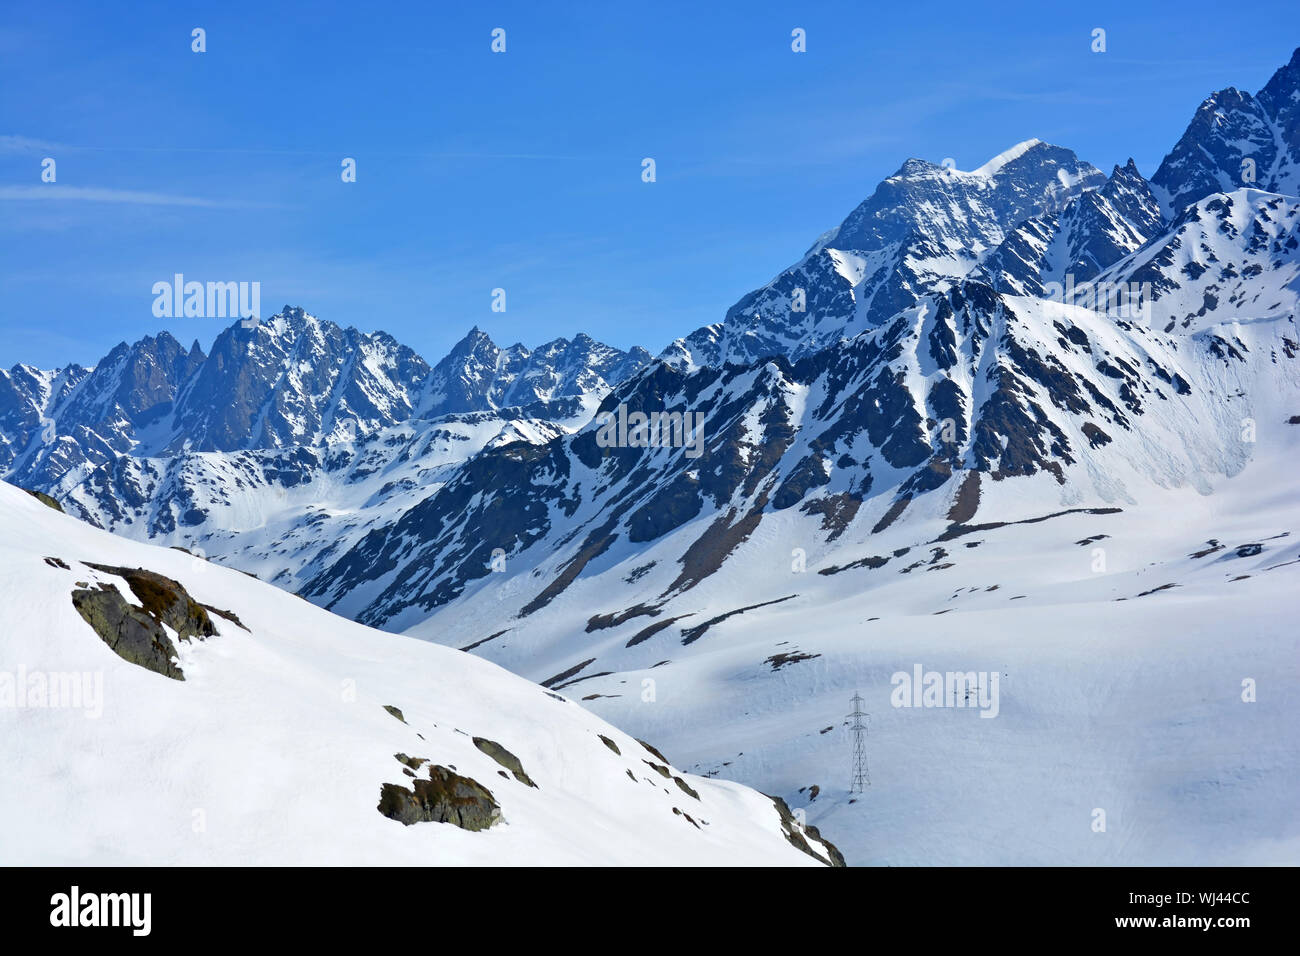 Mt Velan (right) and the Maisons Blanches (centre) in the Swiss Alps as seen from the Great St Bernard Pass Stock Photo